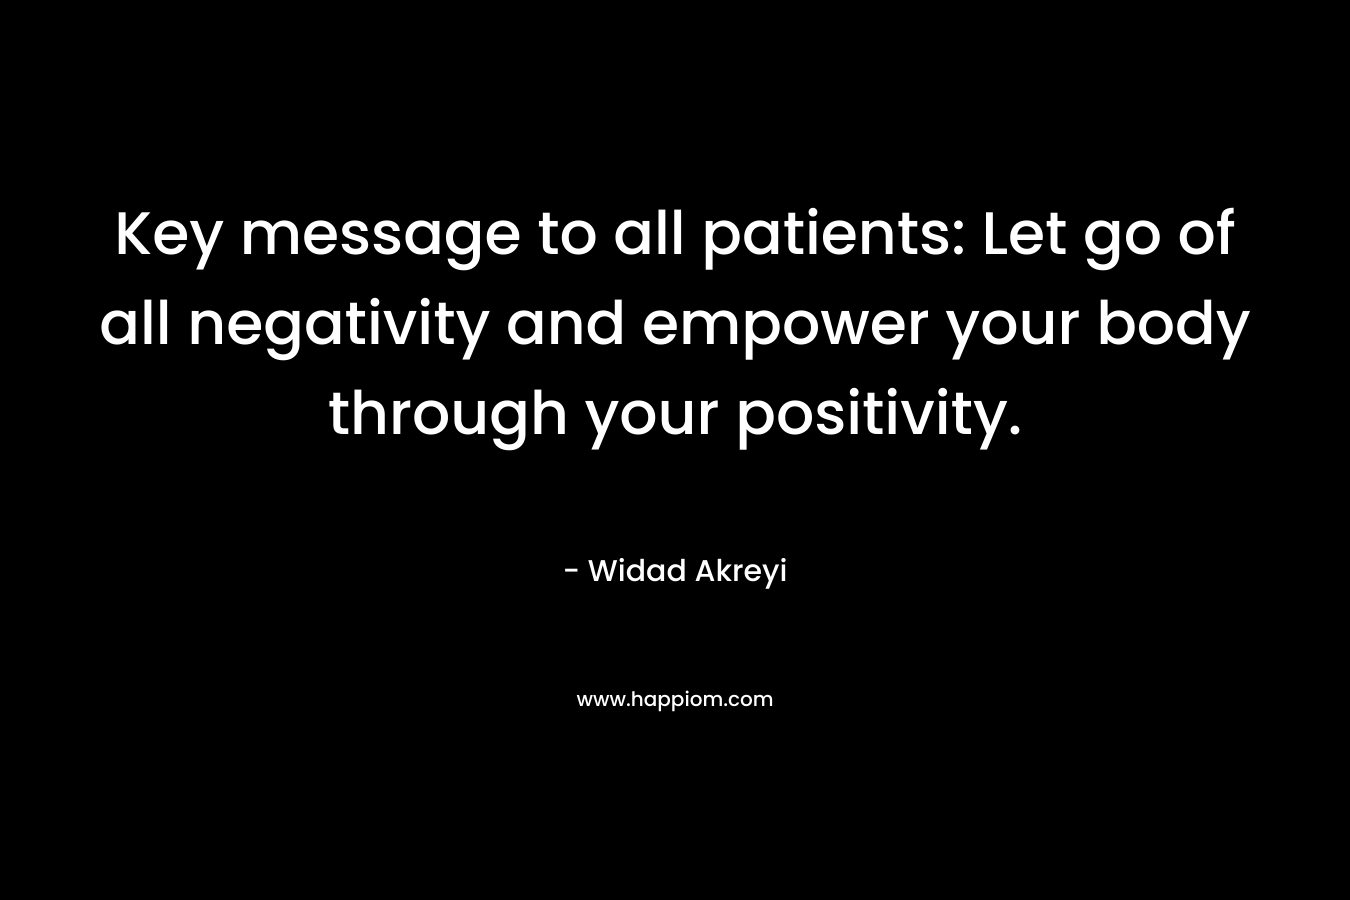 Key message to all patients: Let go of all negativity and empower your body through your positivity.